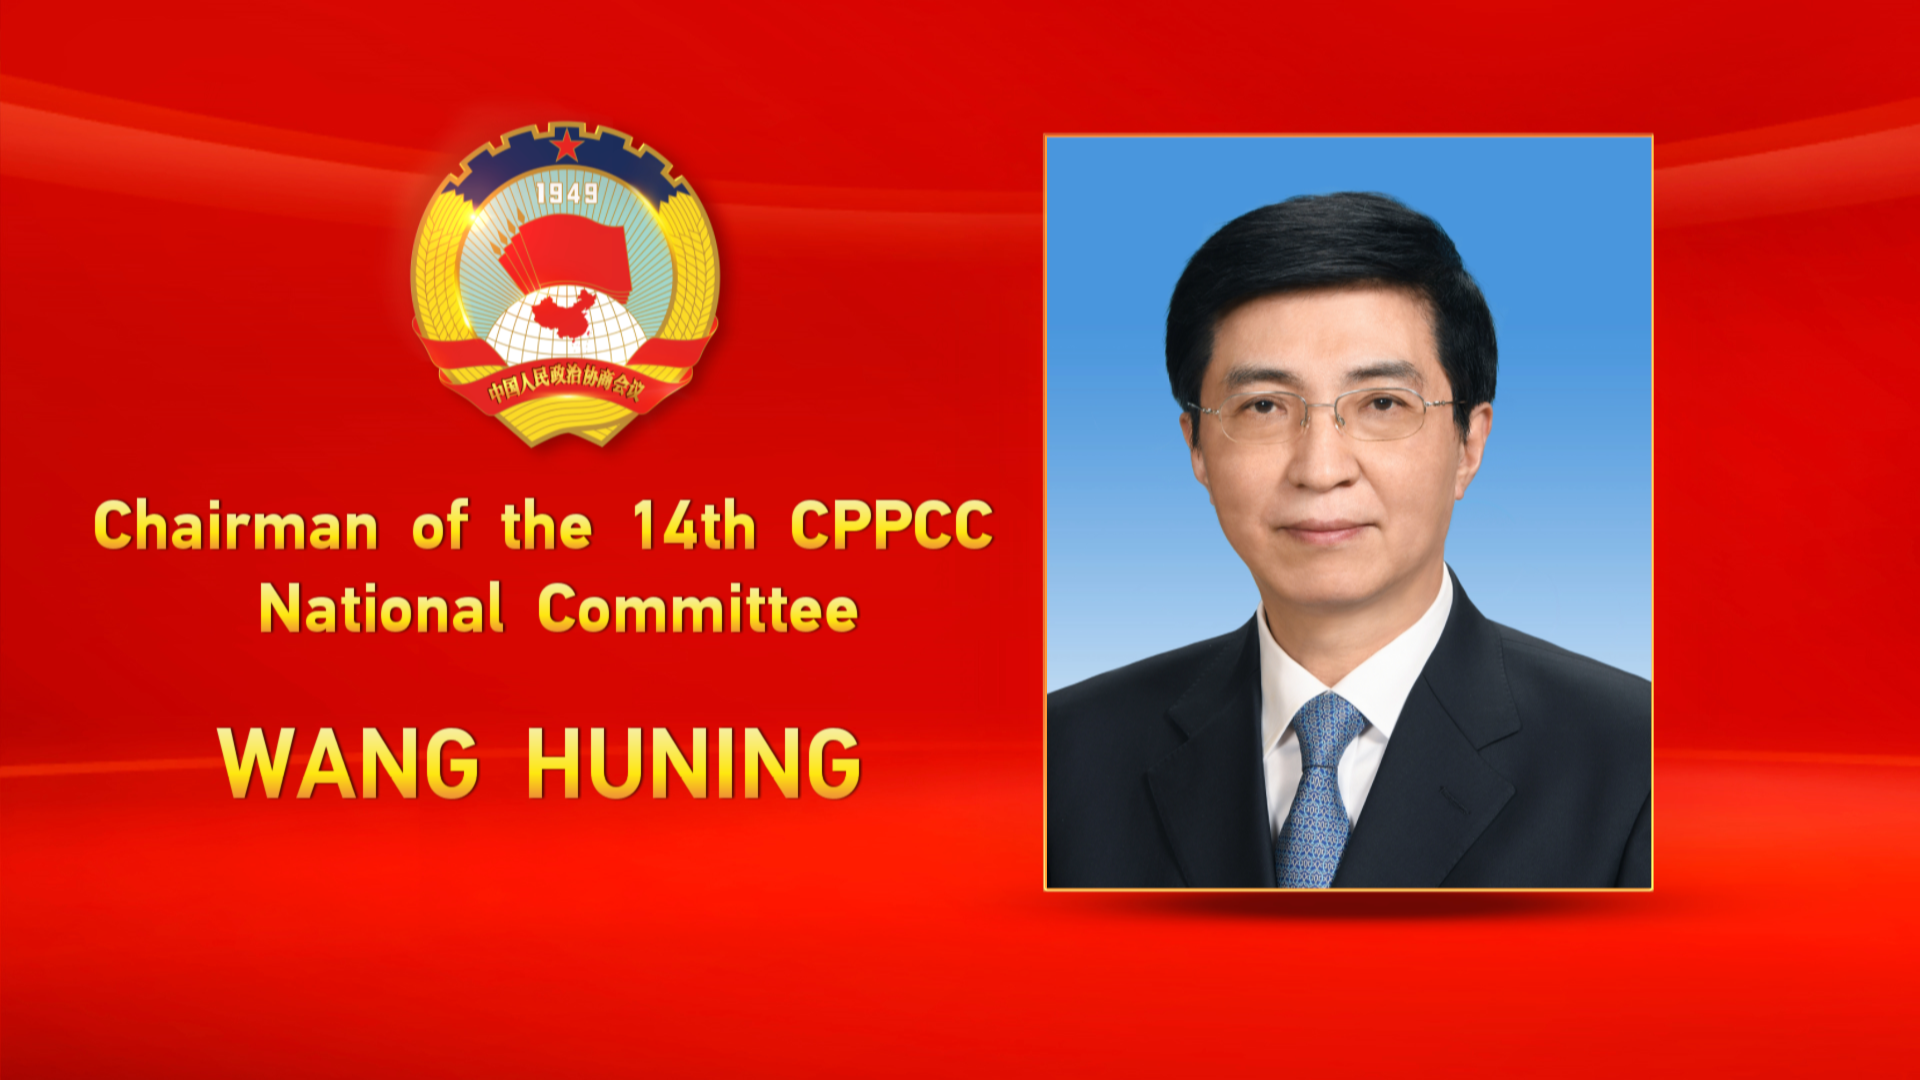 Brief introduction of Wang Huning – chairman of 14th CPPCC National Committee